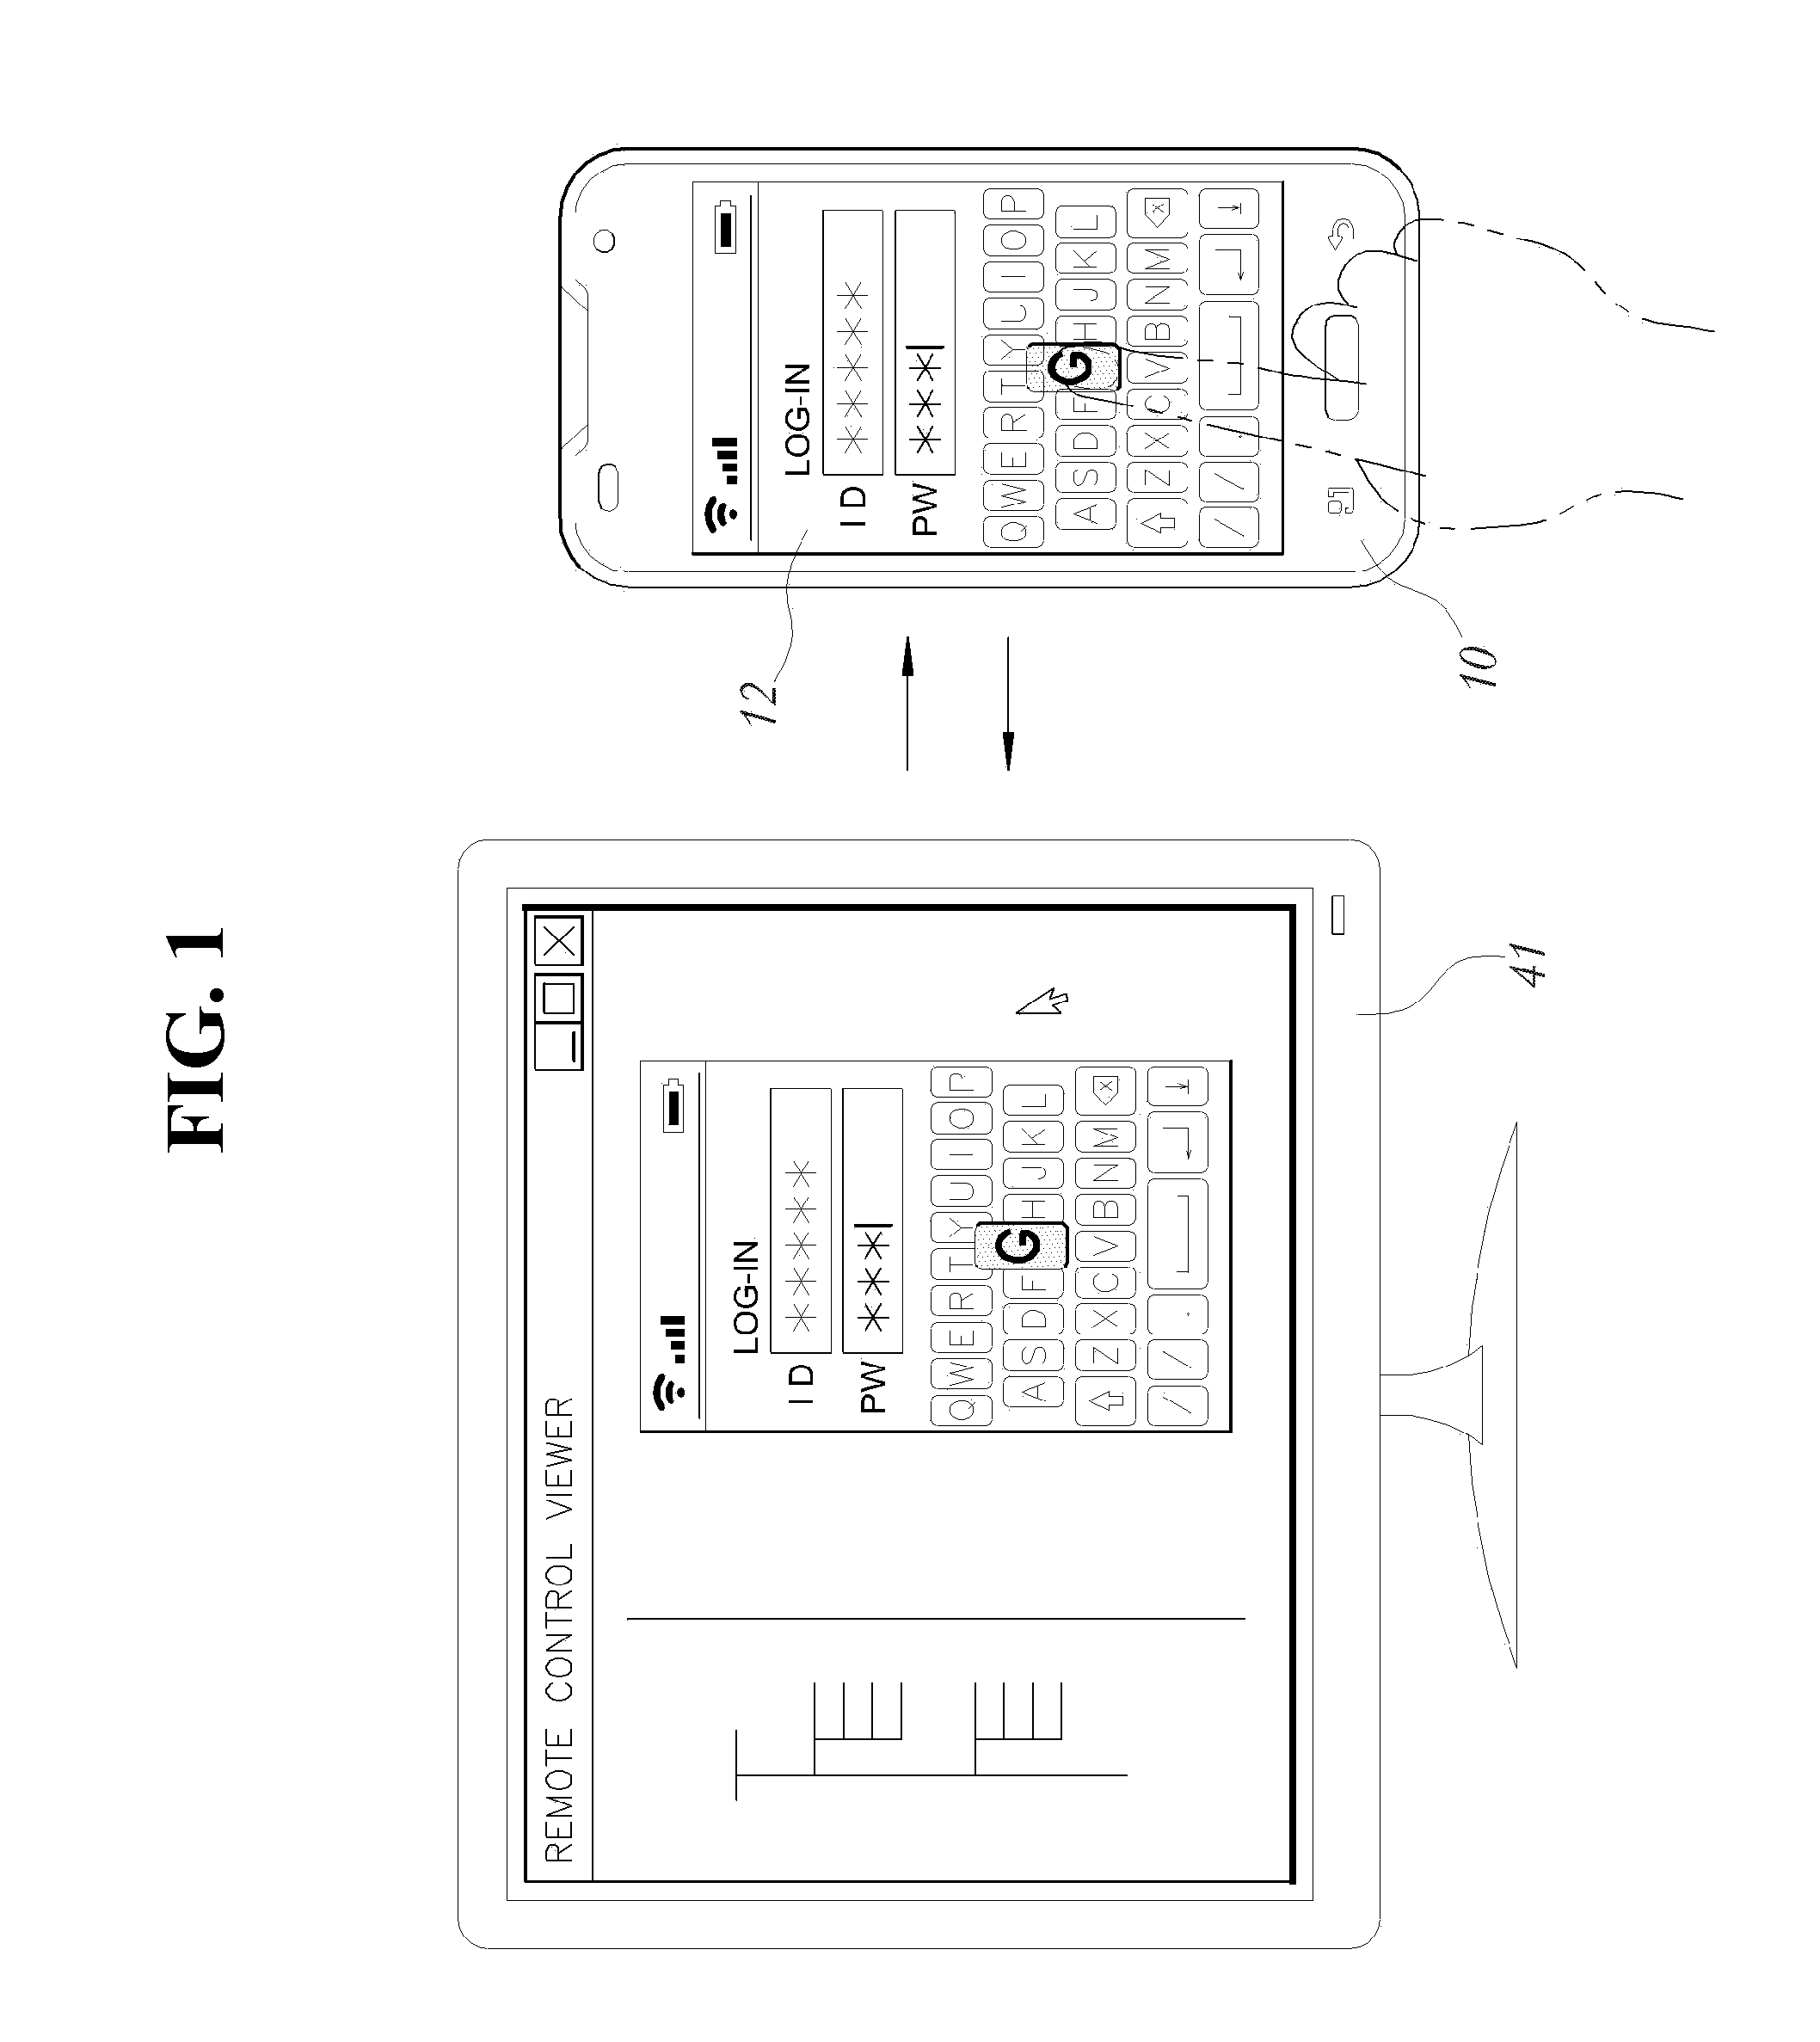 Method of blocking transmission of screen information of mobile communication terminal while performing remote control using registration of alert message in status bar